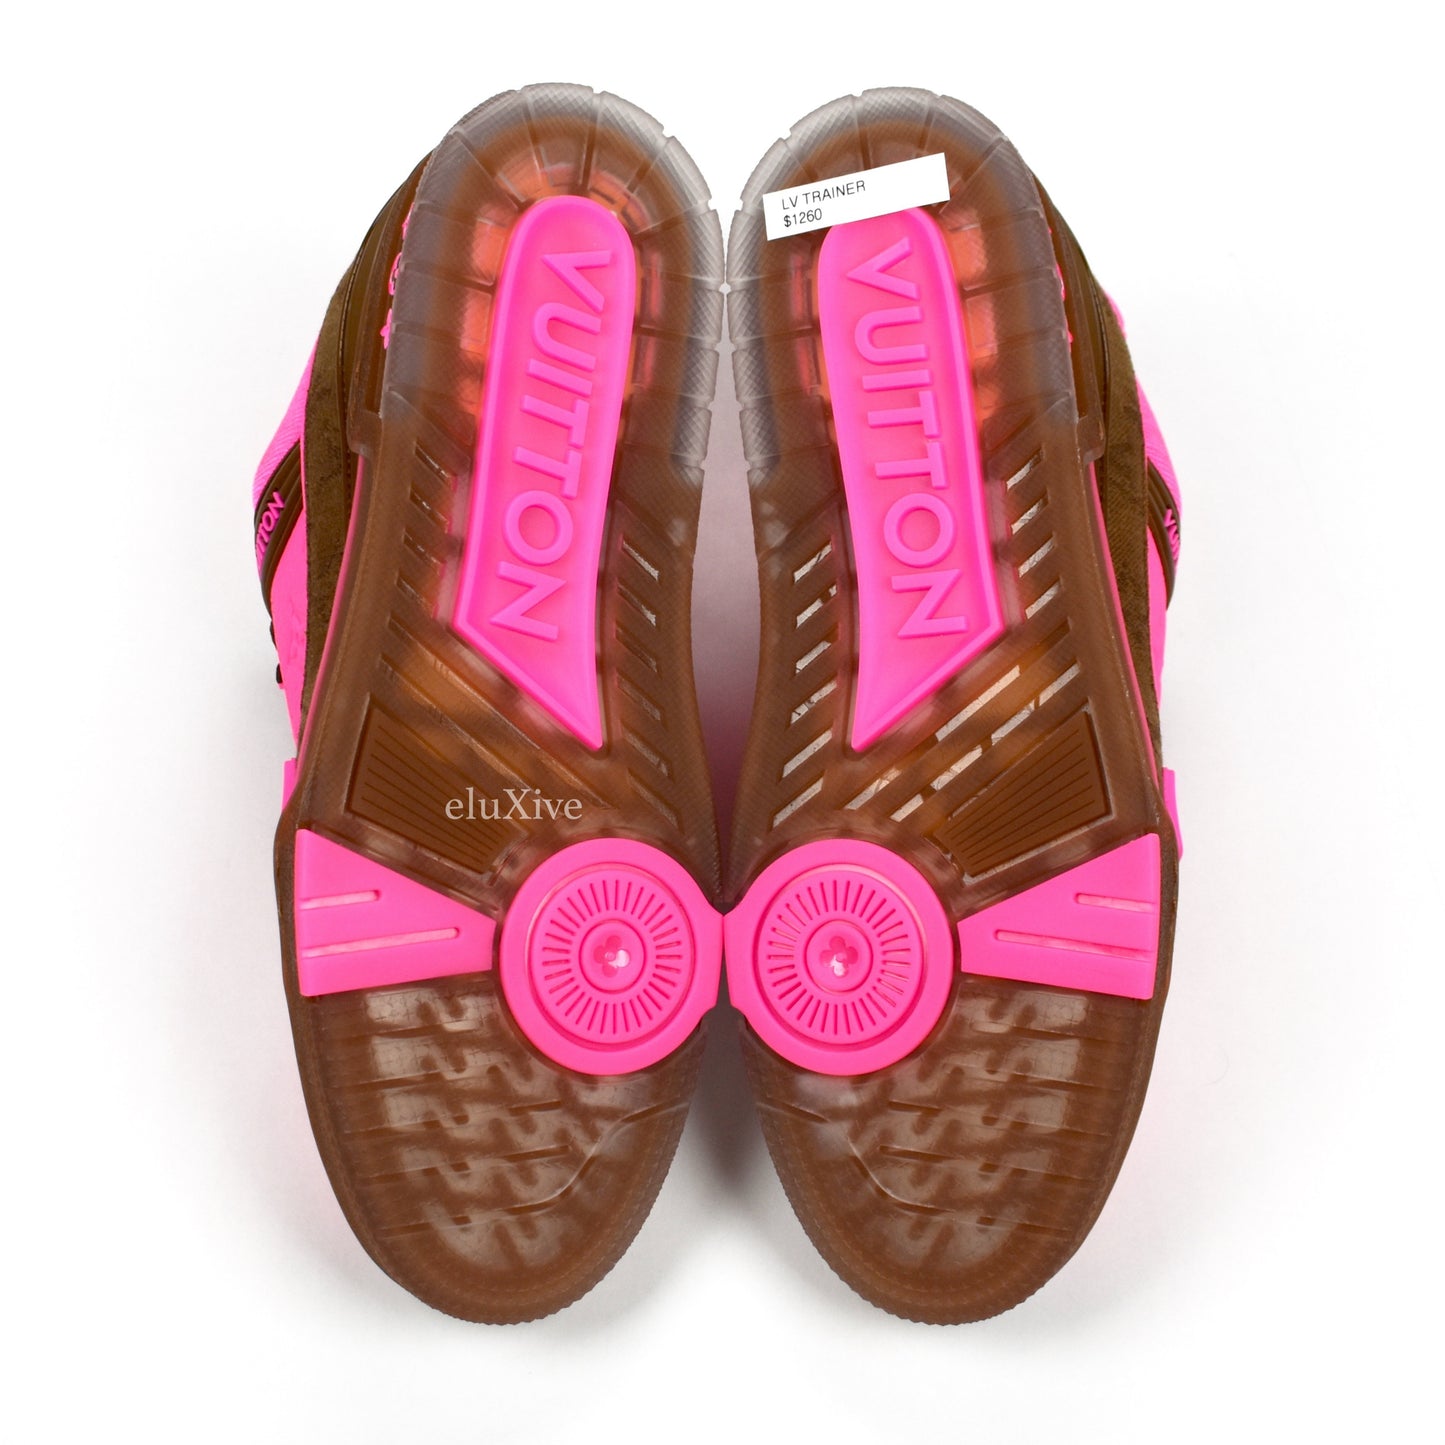 Louis Vuitton - Pink/Brown Leather Trainer Sneakers